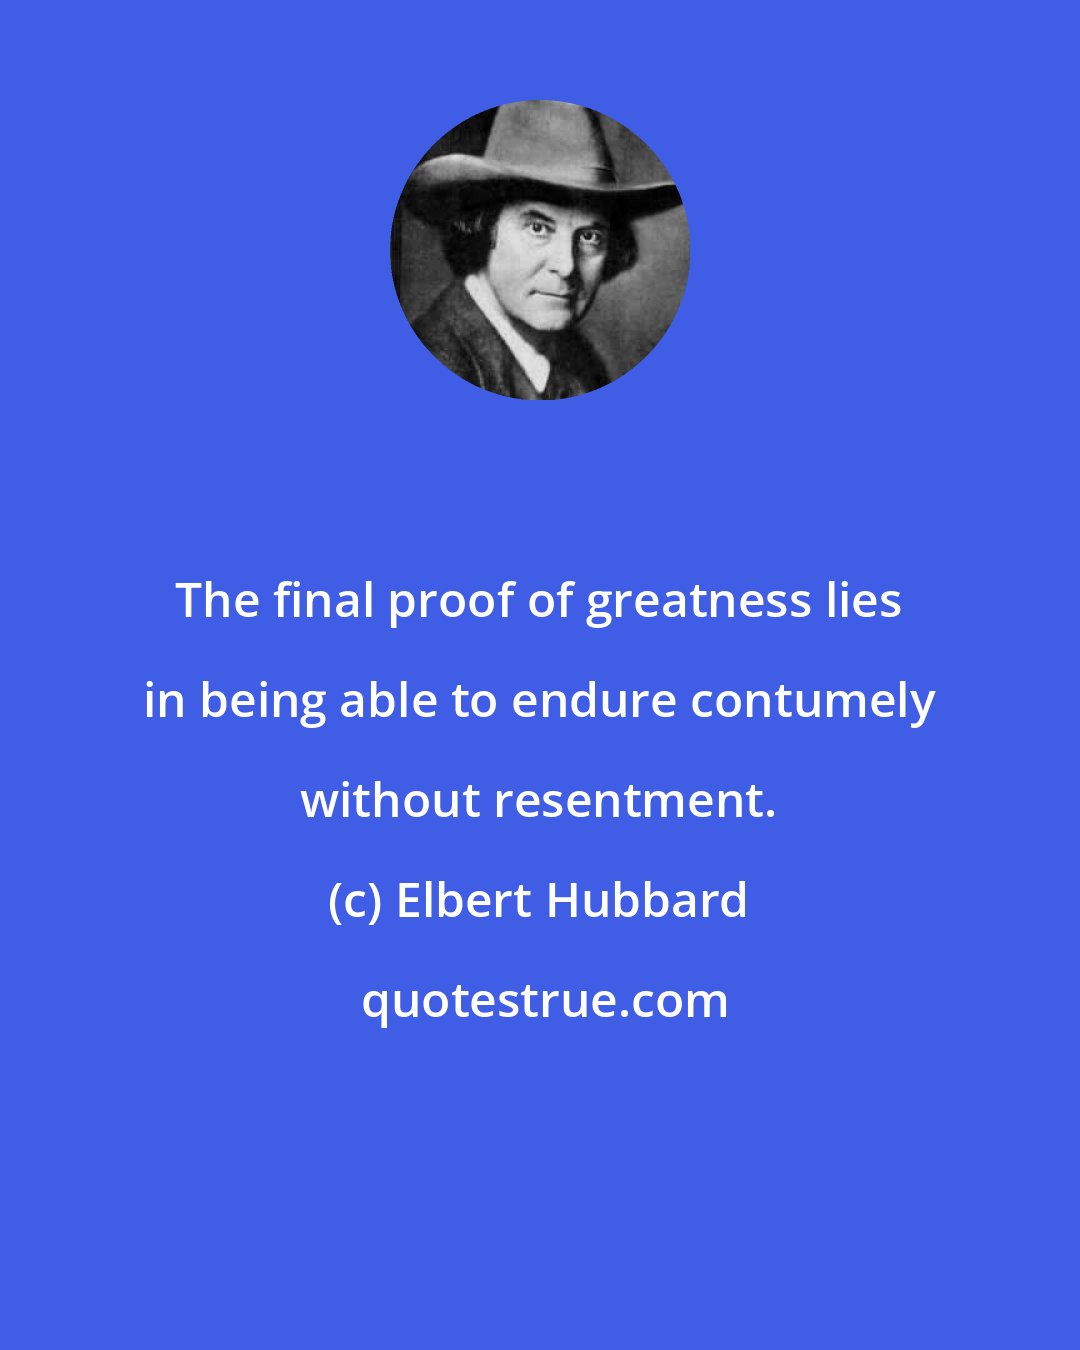 Elbert Hubbard: The final proof of greatness lies in being able to endure contumely without resentment.